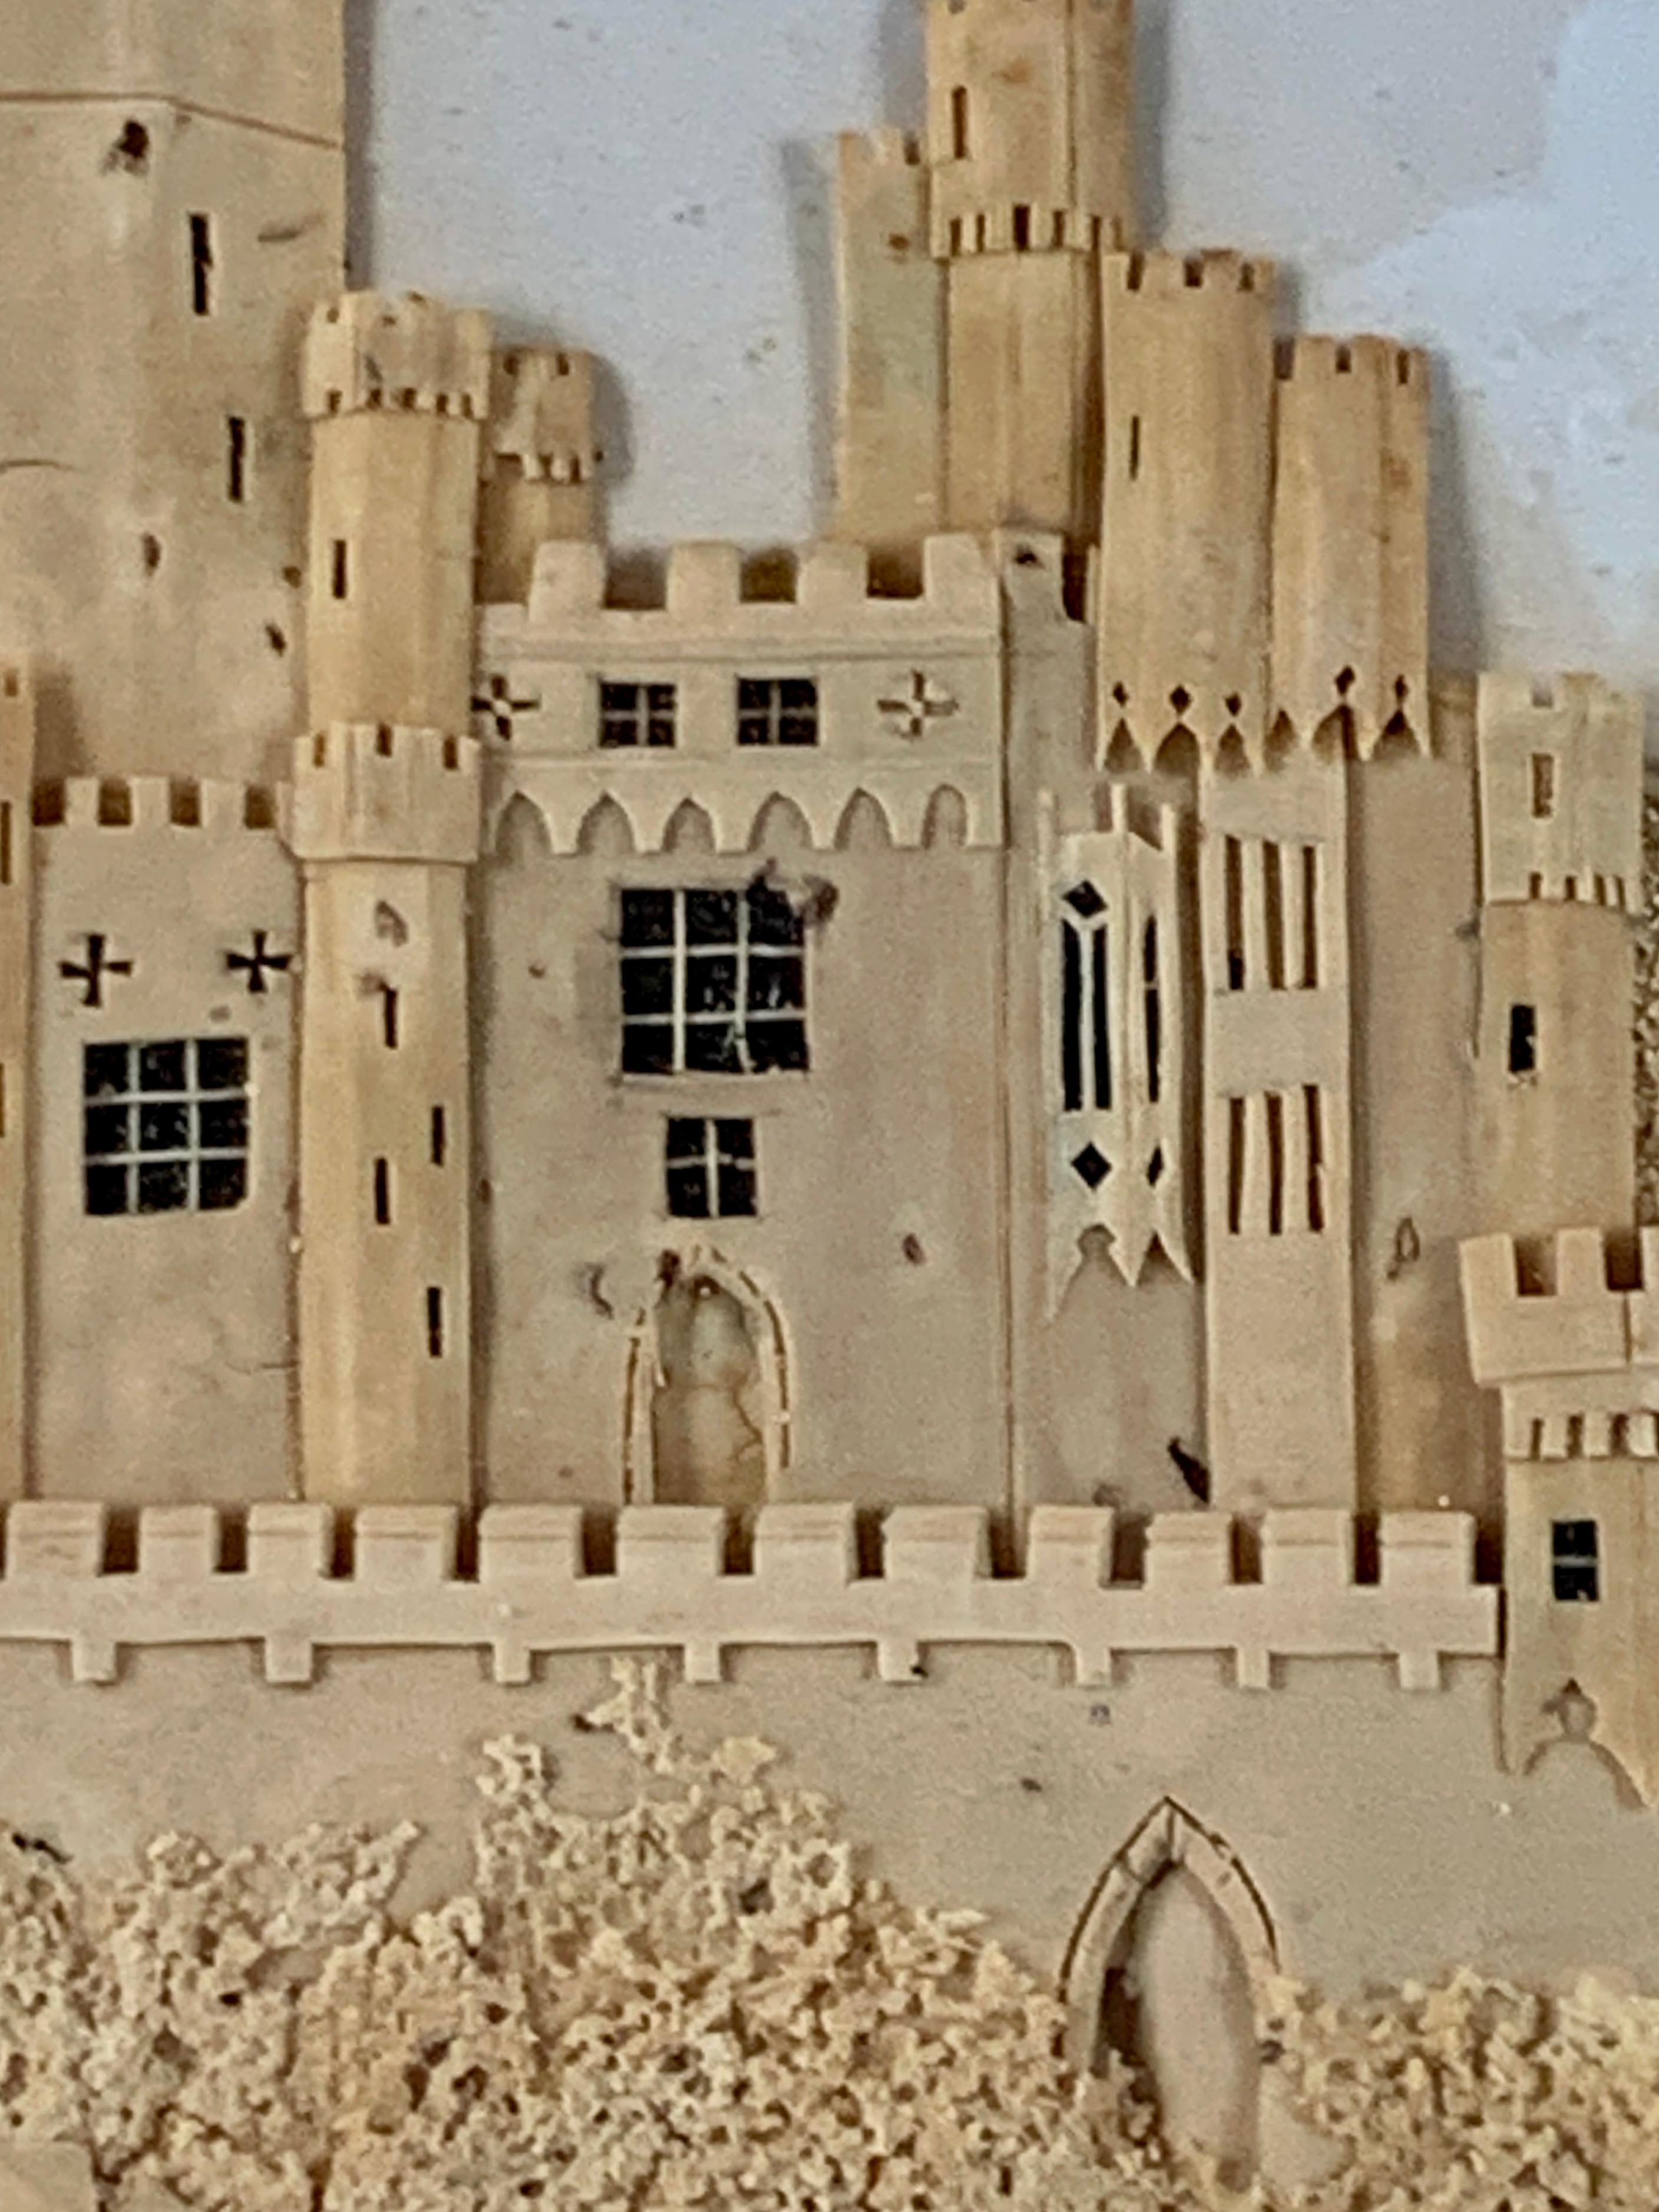 Hand-Crafted Hand Crafted Cork Work Diorama with English Castle made Mid 19th Century For Sale